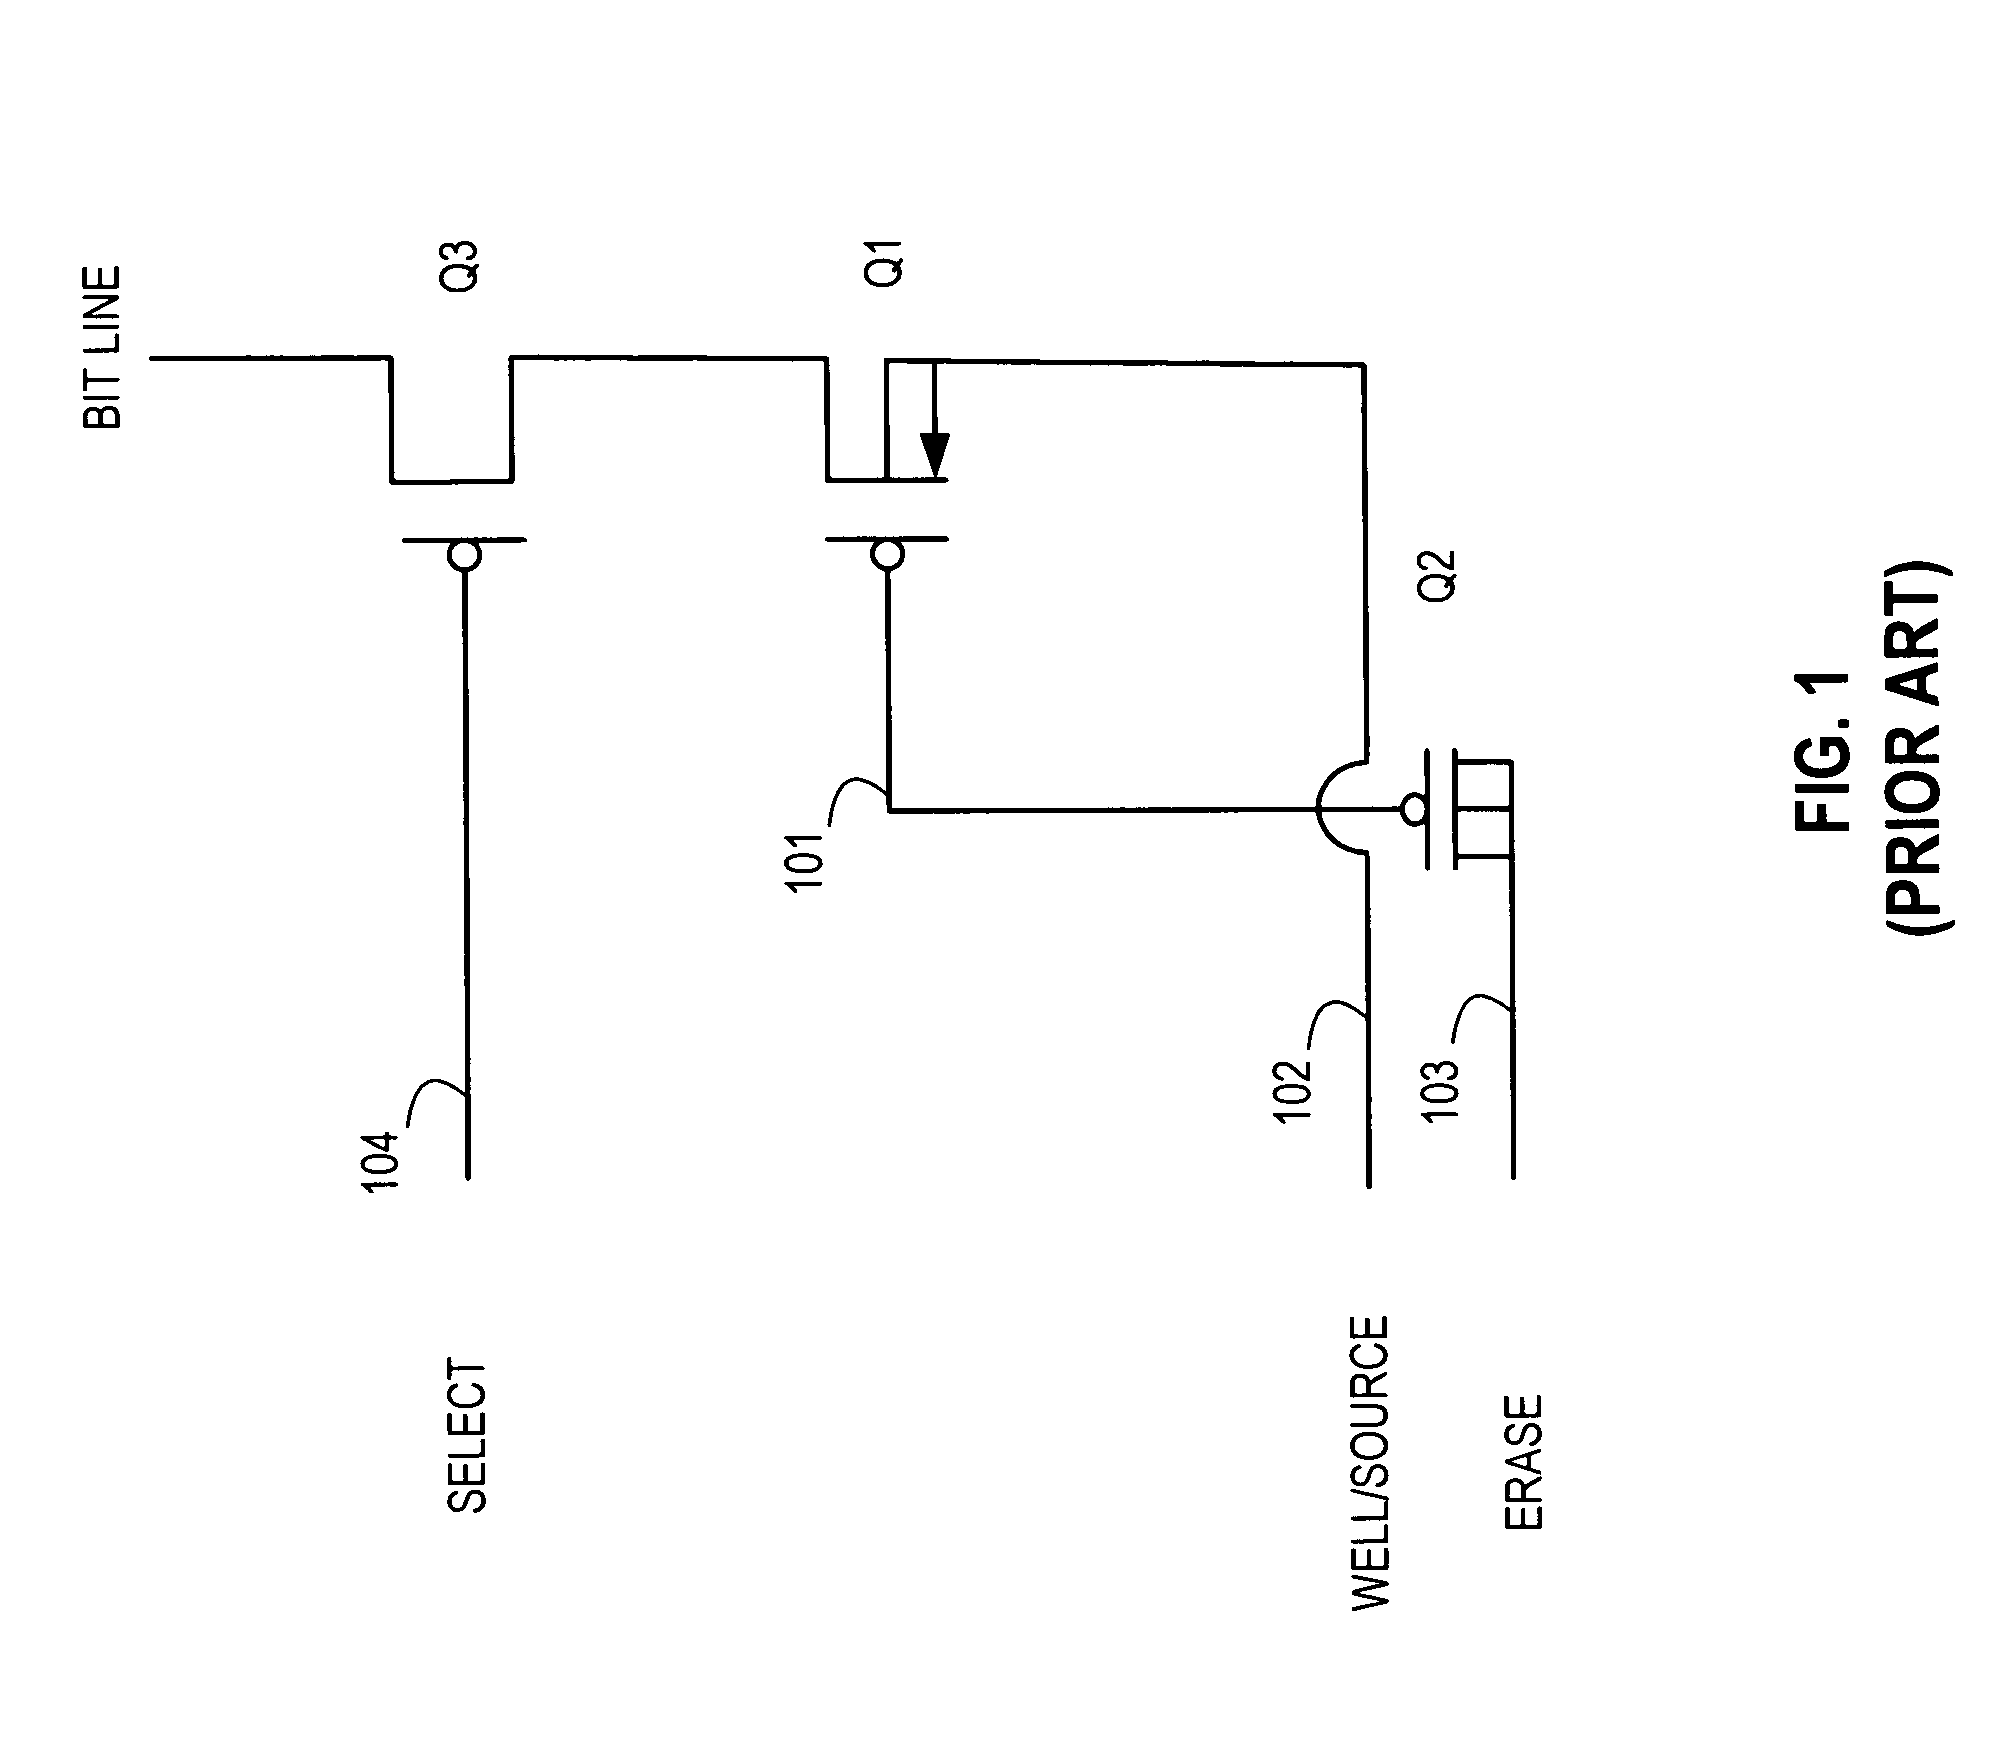 Non-volatile memory cell circuit with programming through band-to-band tunneling and impact ionization gate current